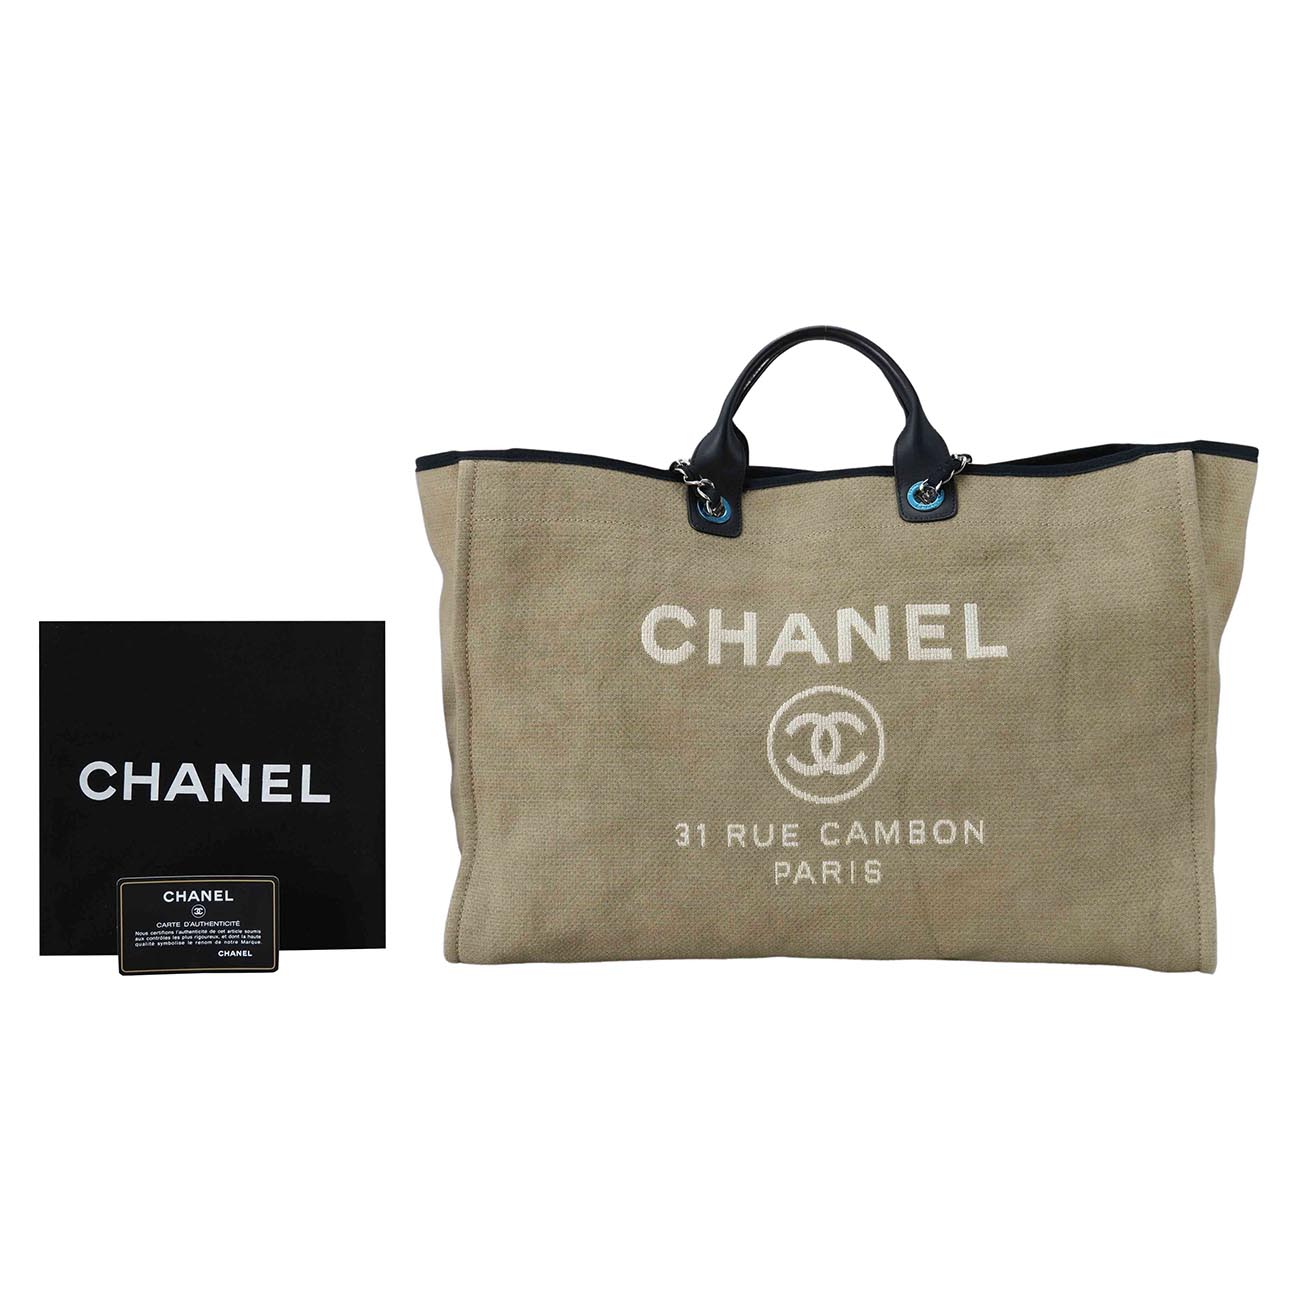 CHANEL(USED)샤넬 도빌백